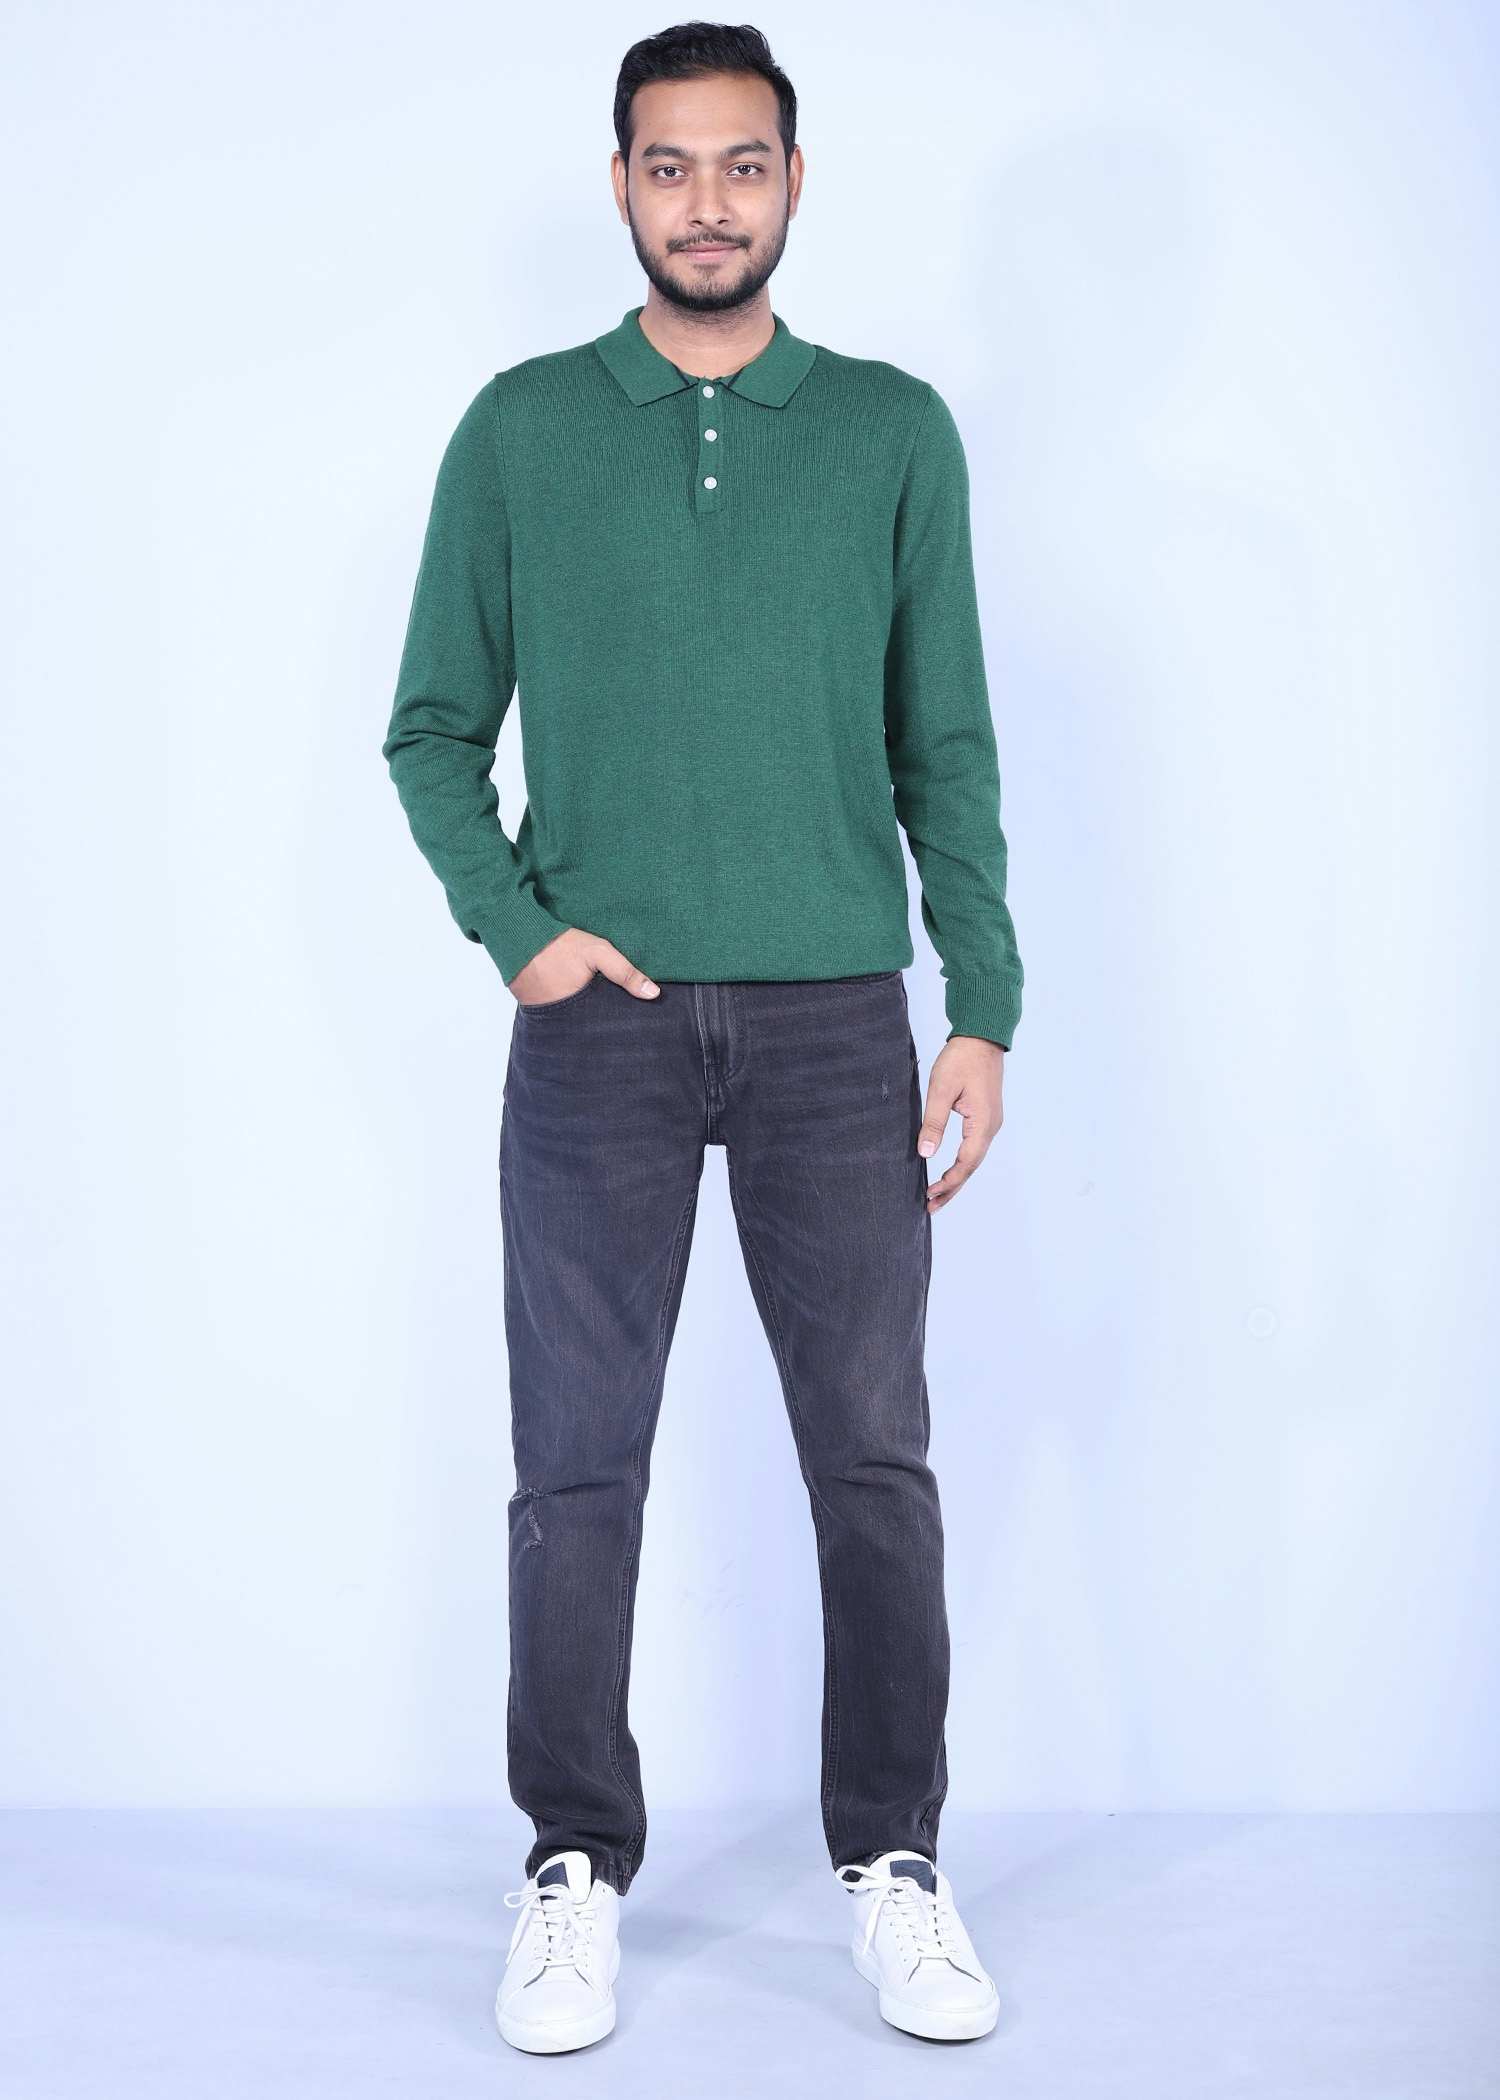 athens sweater green color full front view